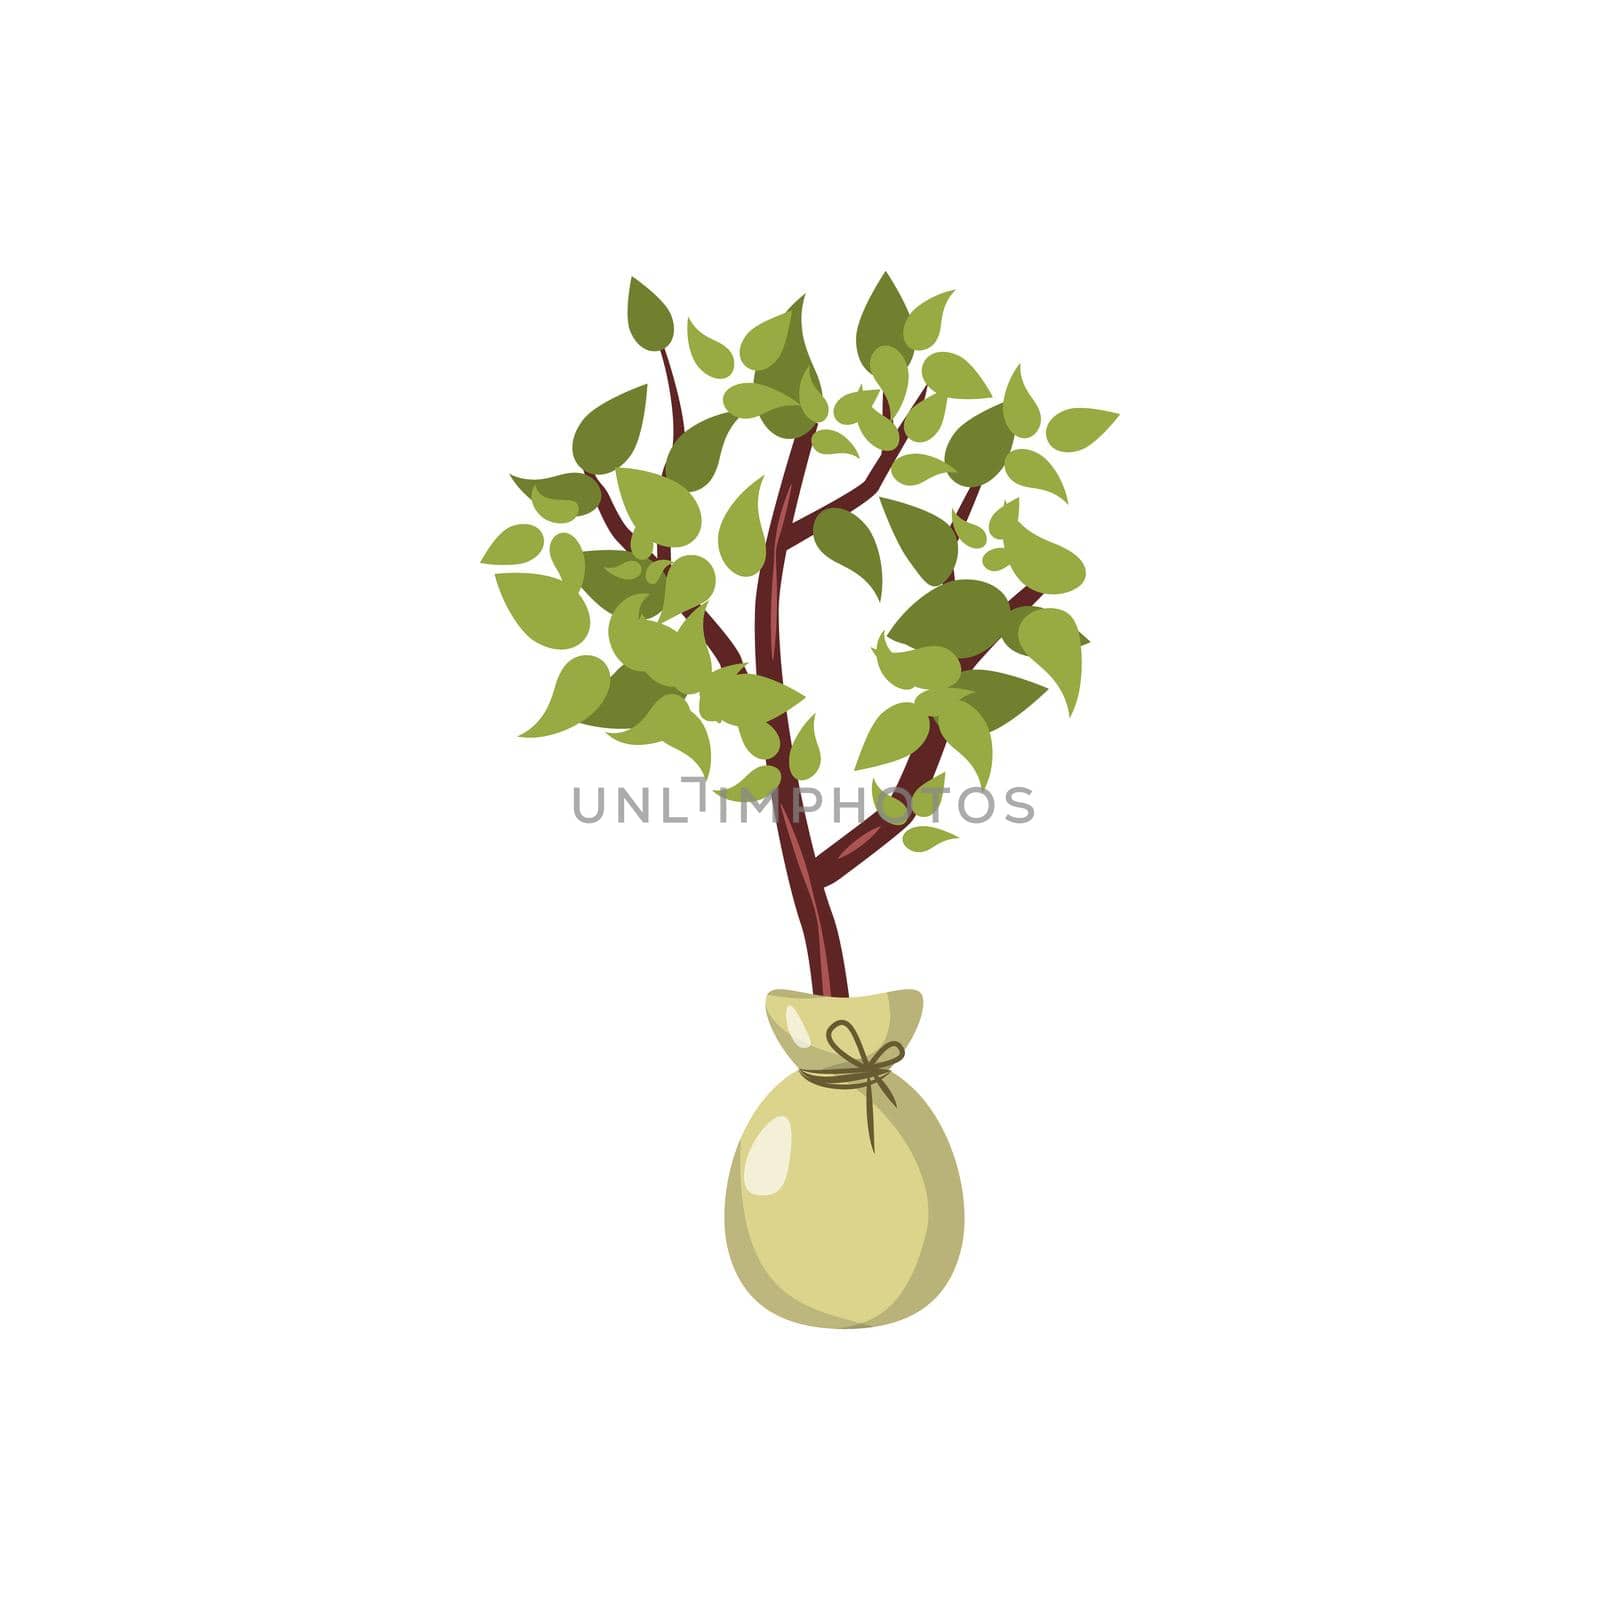 Seedling icon in cartoon style on a white background